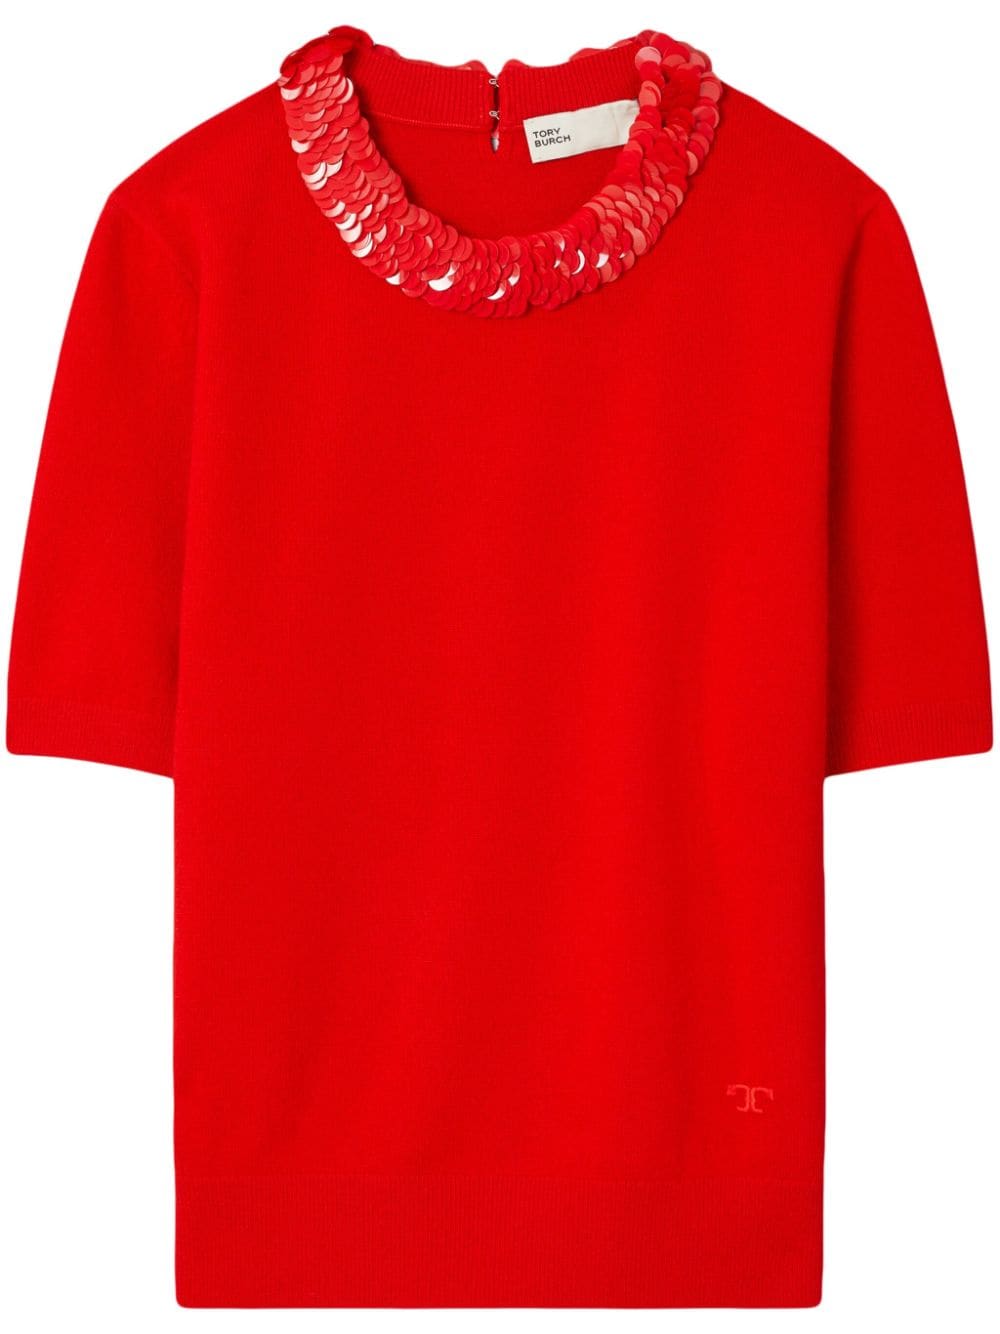 TORY BURCH SEQUIN-EMBELLISHED FINE-KNIT TOP